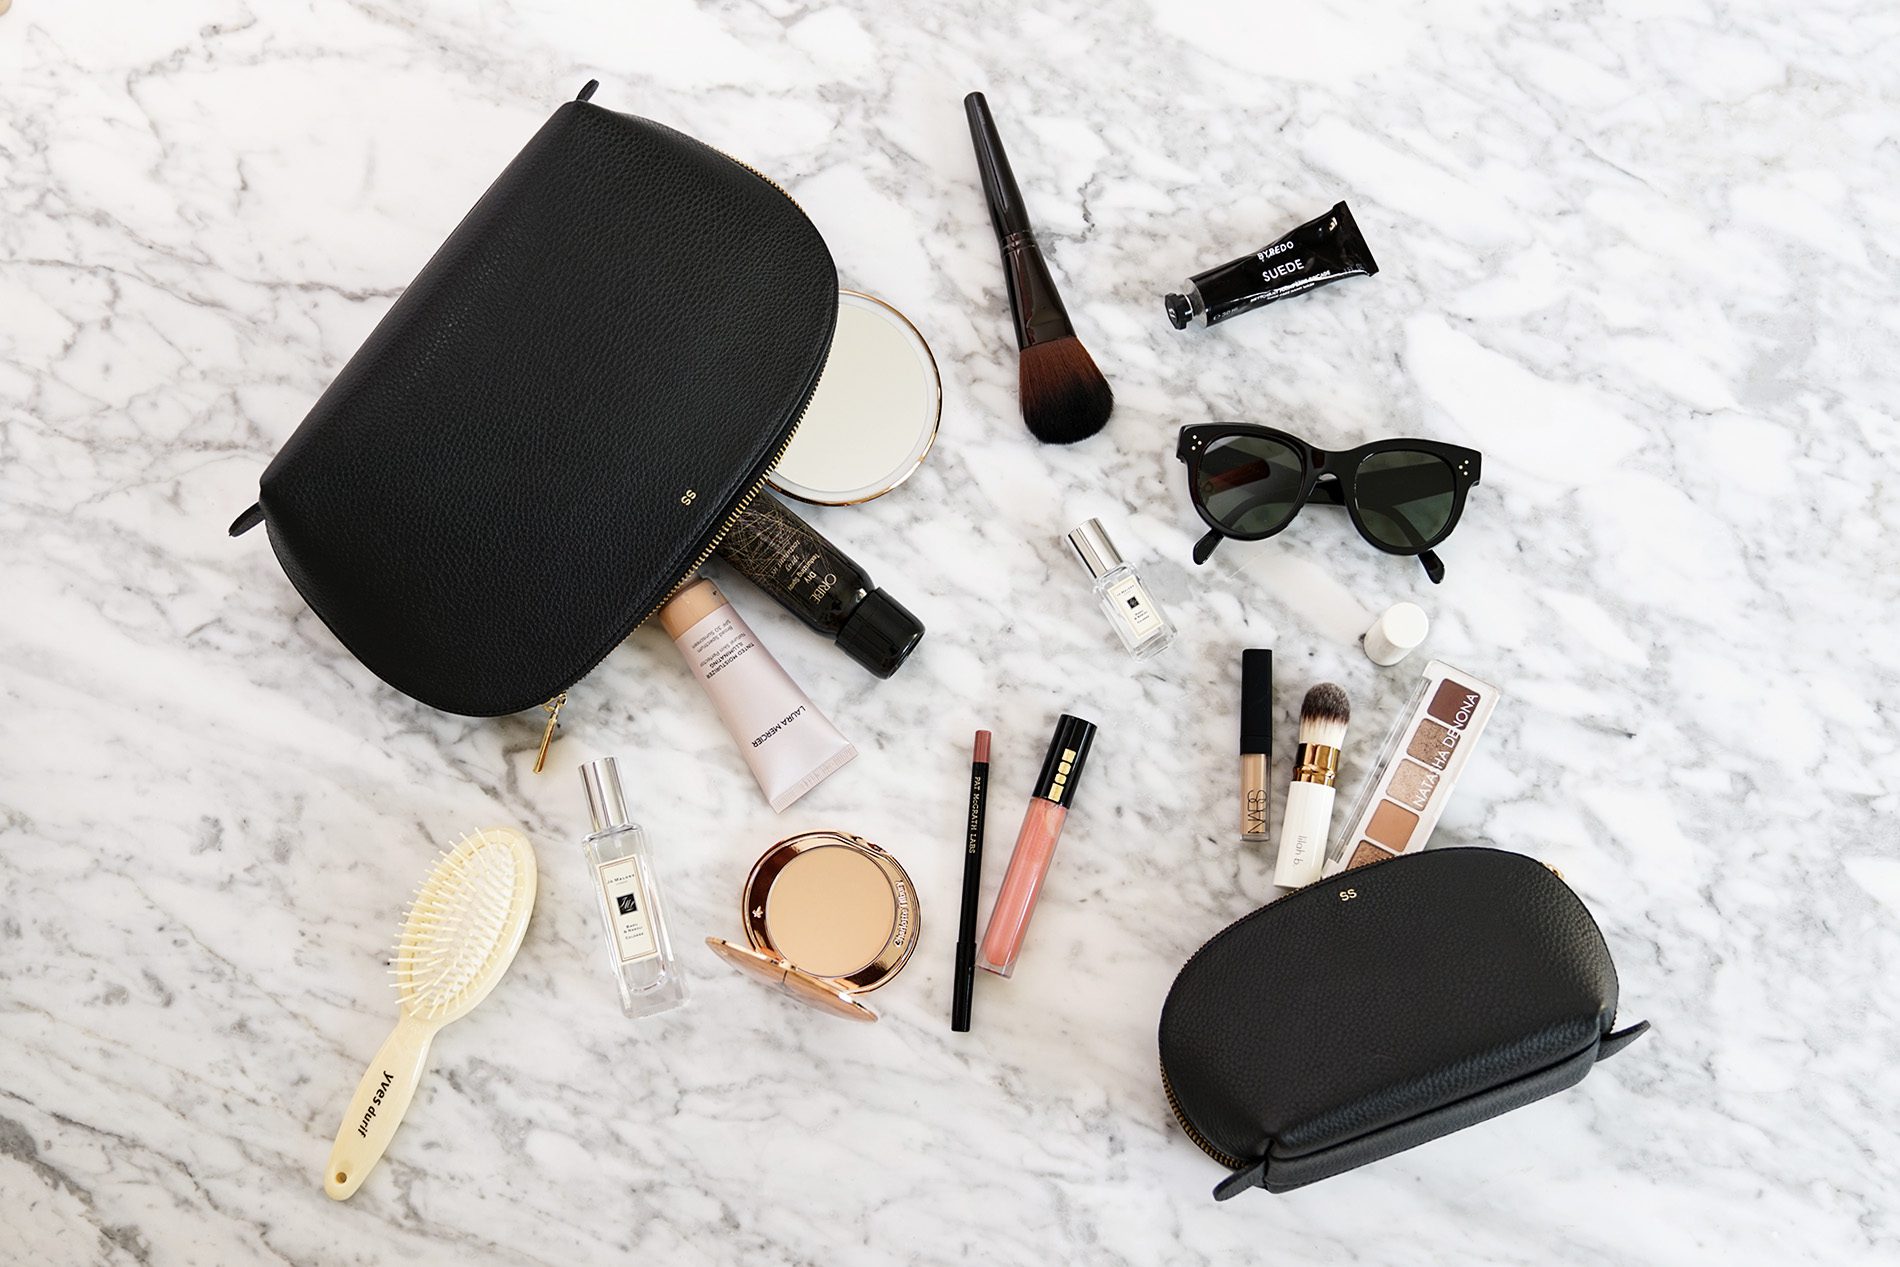 Travel Makeup Pouches I Never Leave Home Without - The Beauty Look Book